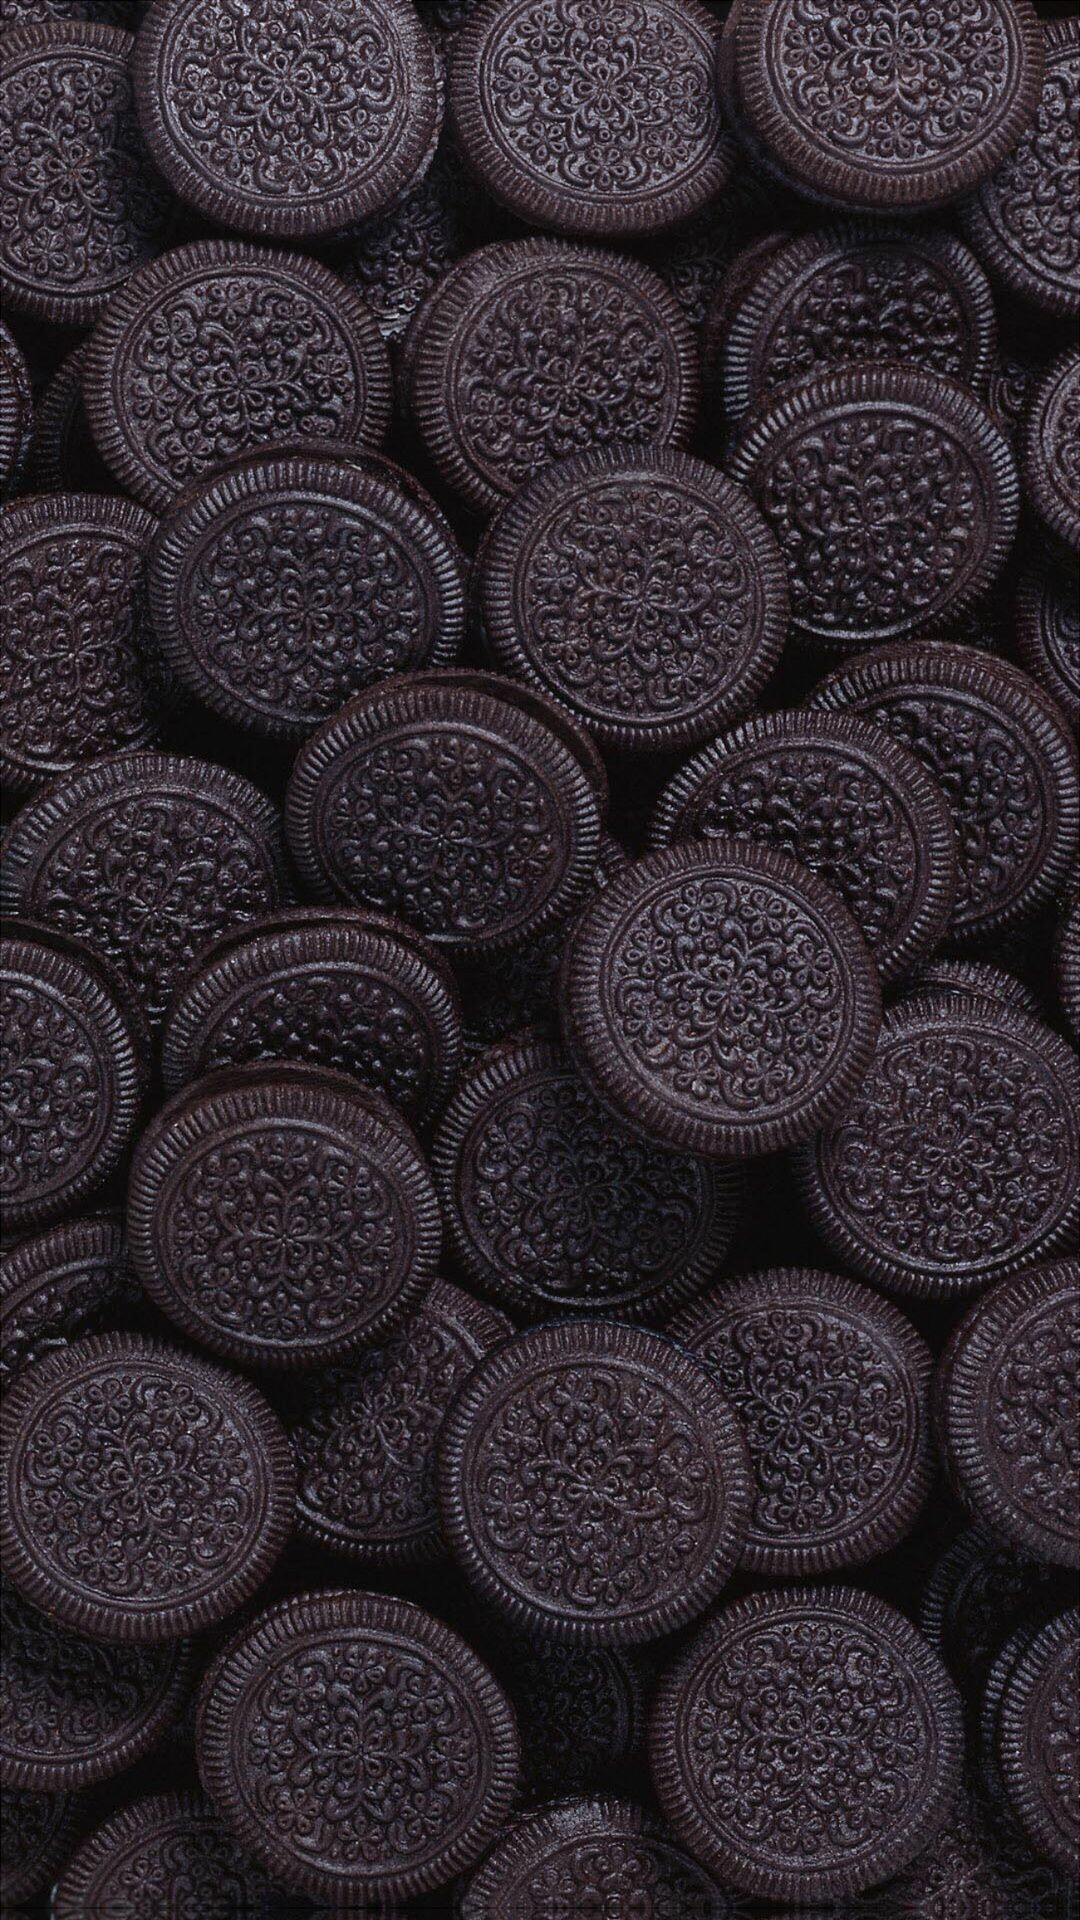 Sweets: Oreo, Sandwich cookie consisting of two biscuits with a sweet filling. 1080x1920 Full HD Background.